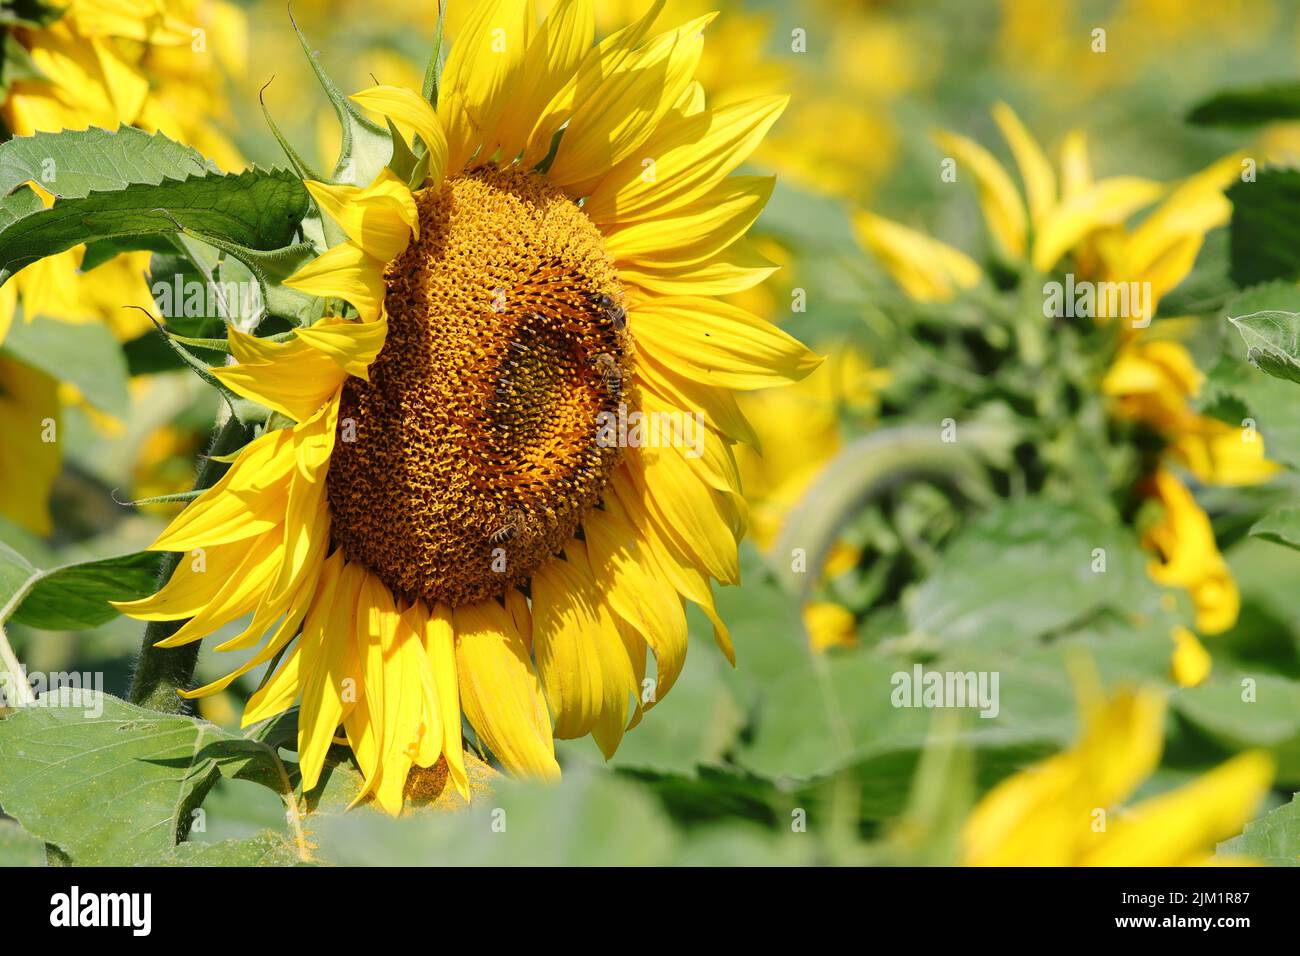 a sunlit helianthus annuus flower in a sunflower field, side view Stock Photo